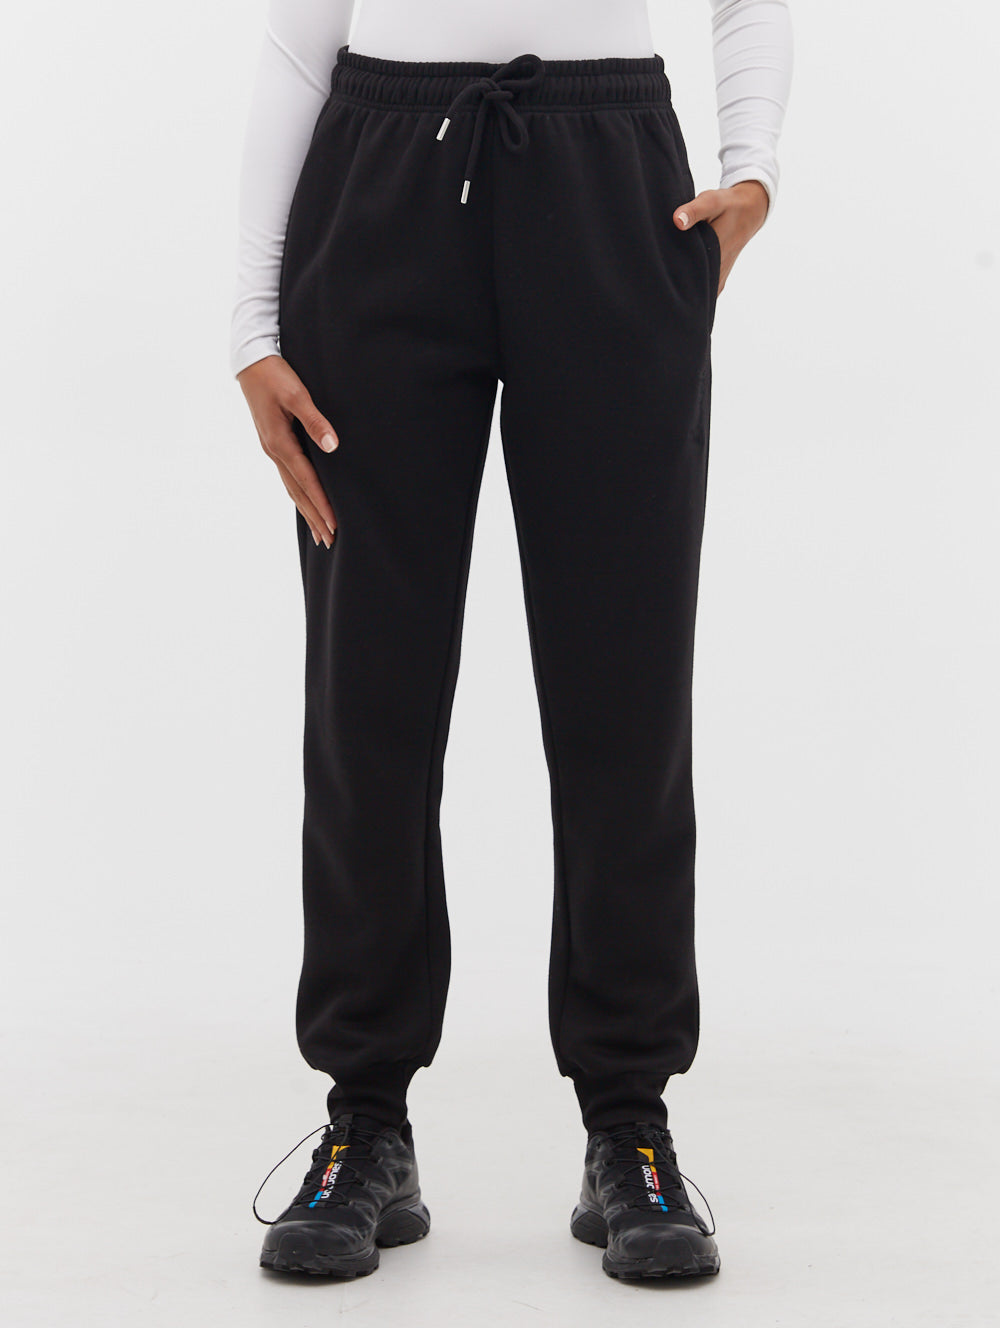 Sustainable Pants For Women